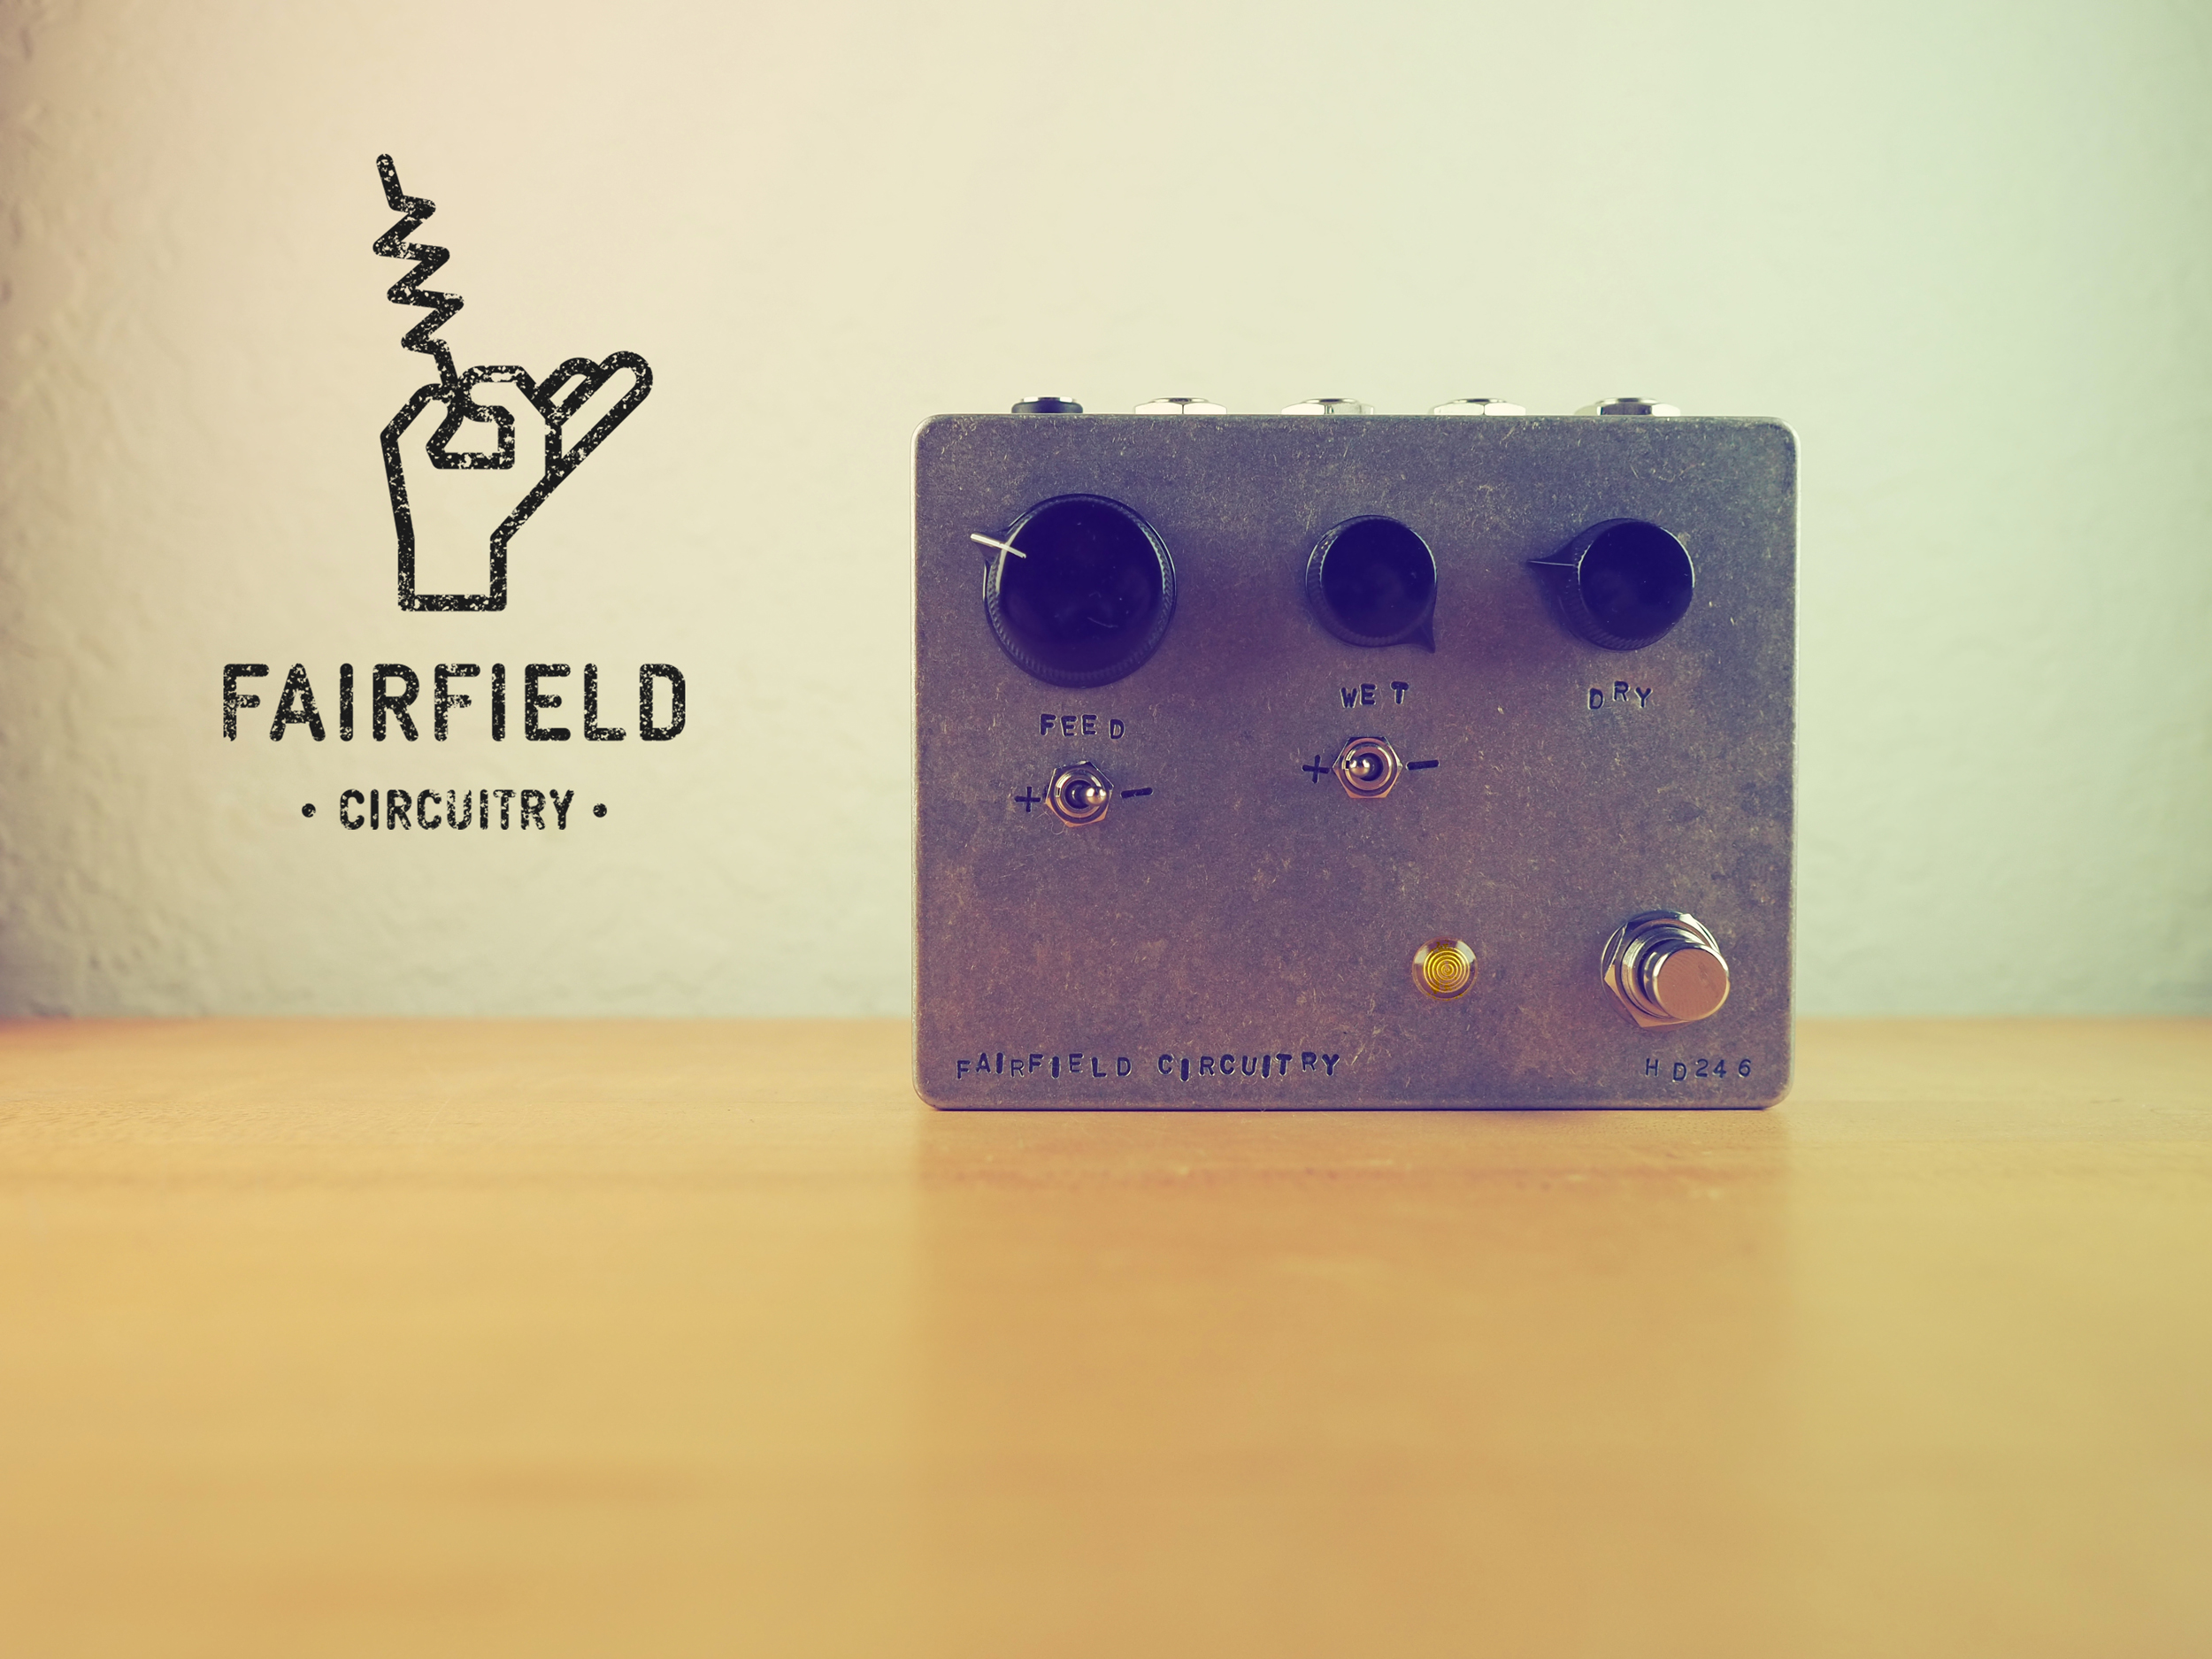 Fairfield Circuitry Hors d'Oeuvre? Active Feedback Loop - Pedal of